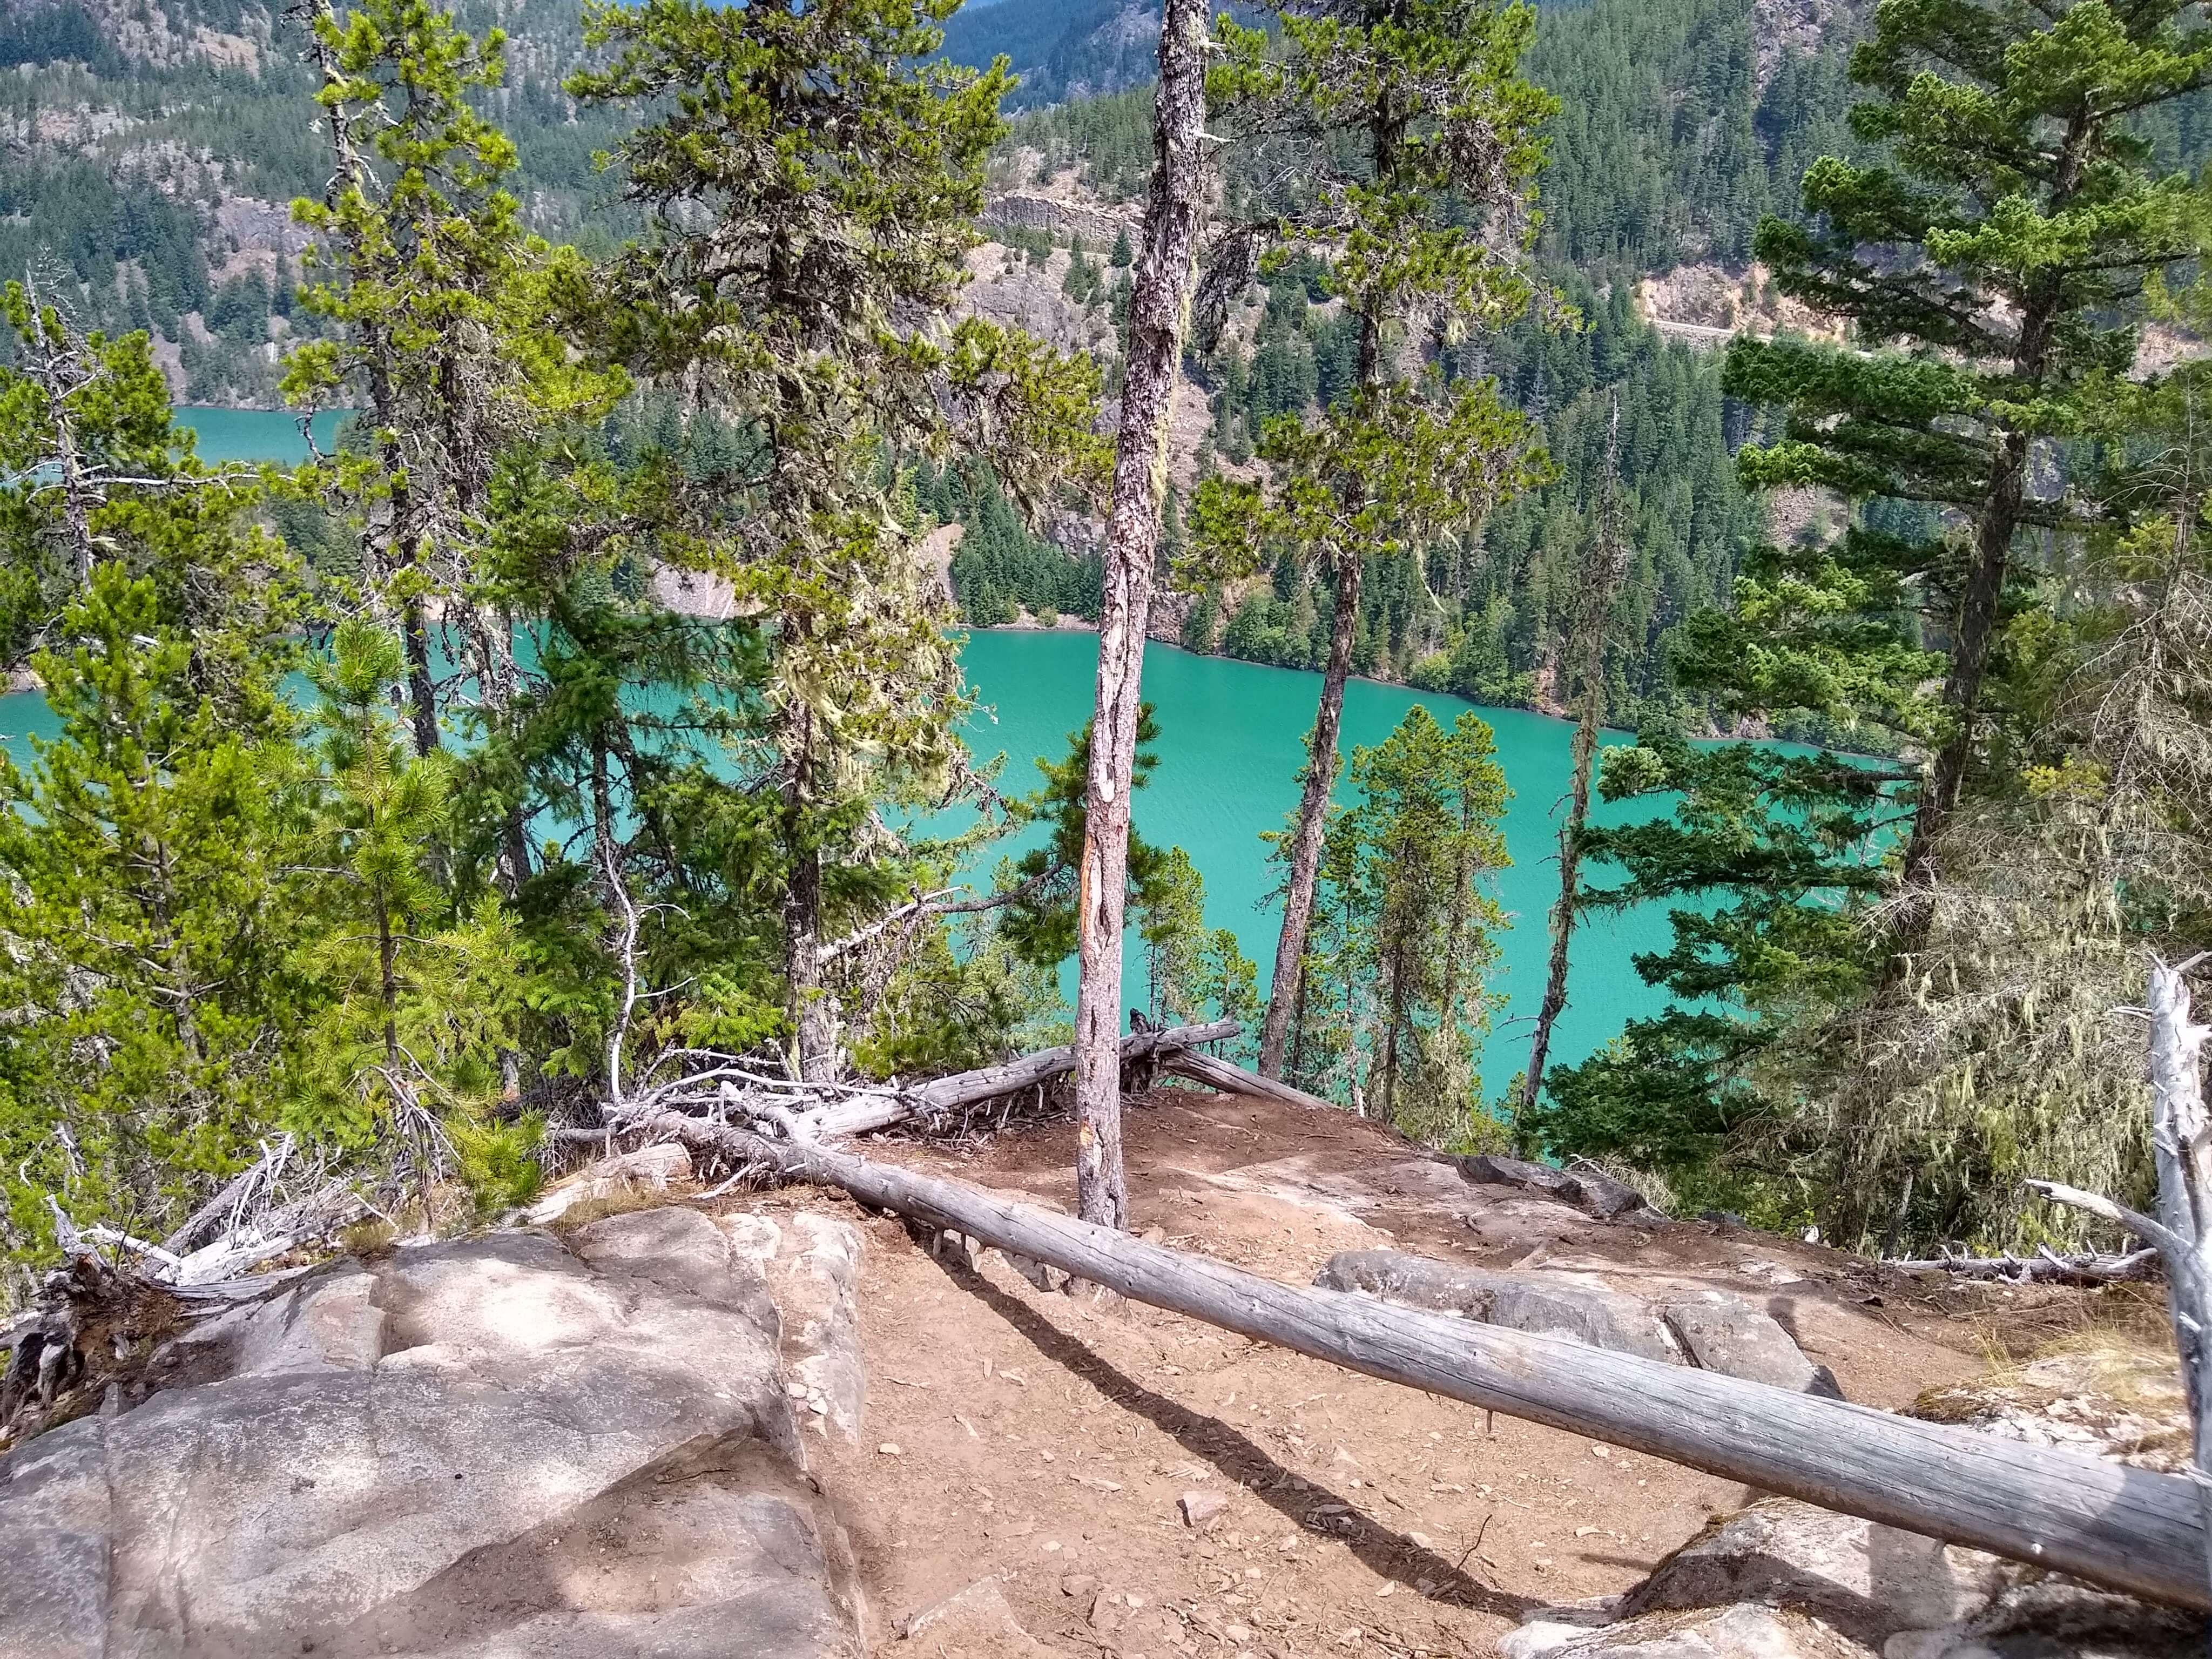 View of Diablo Lake's turquoise water from Thunder Knob